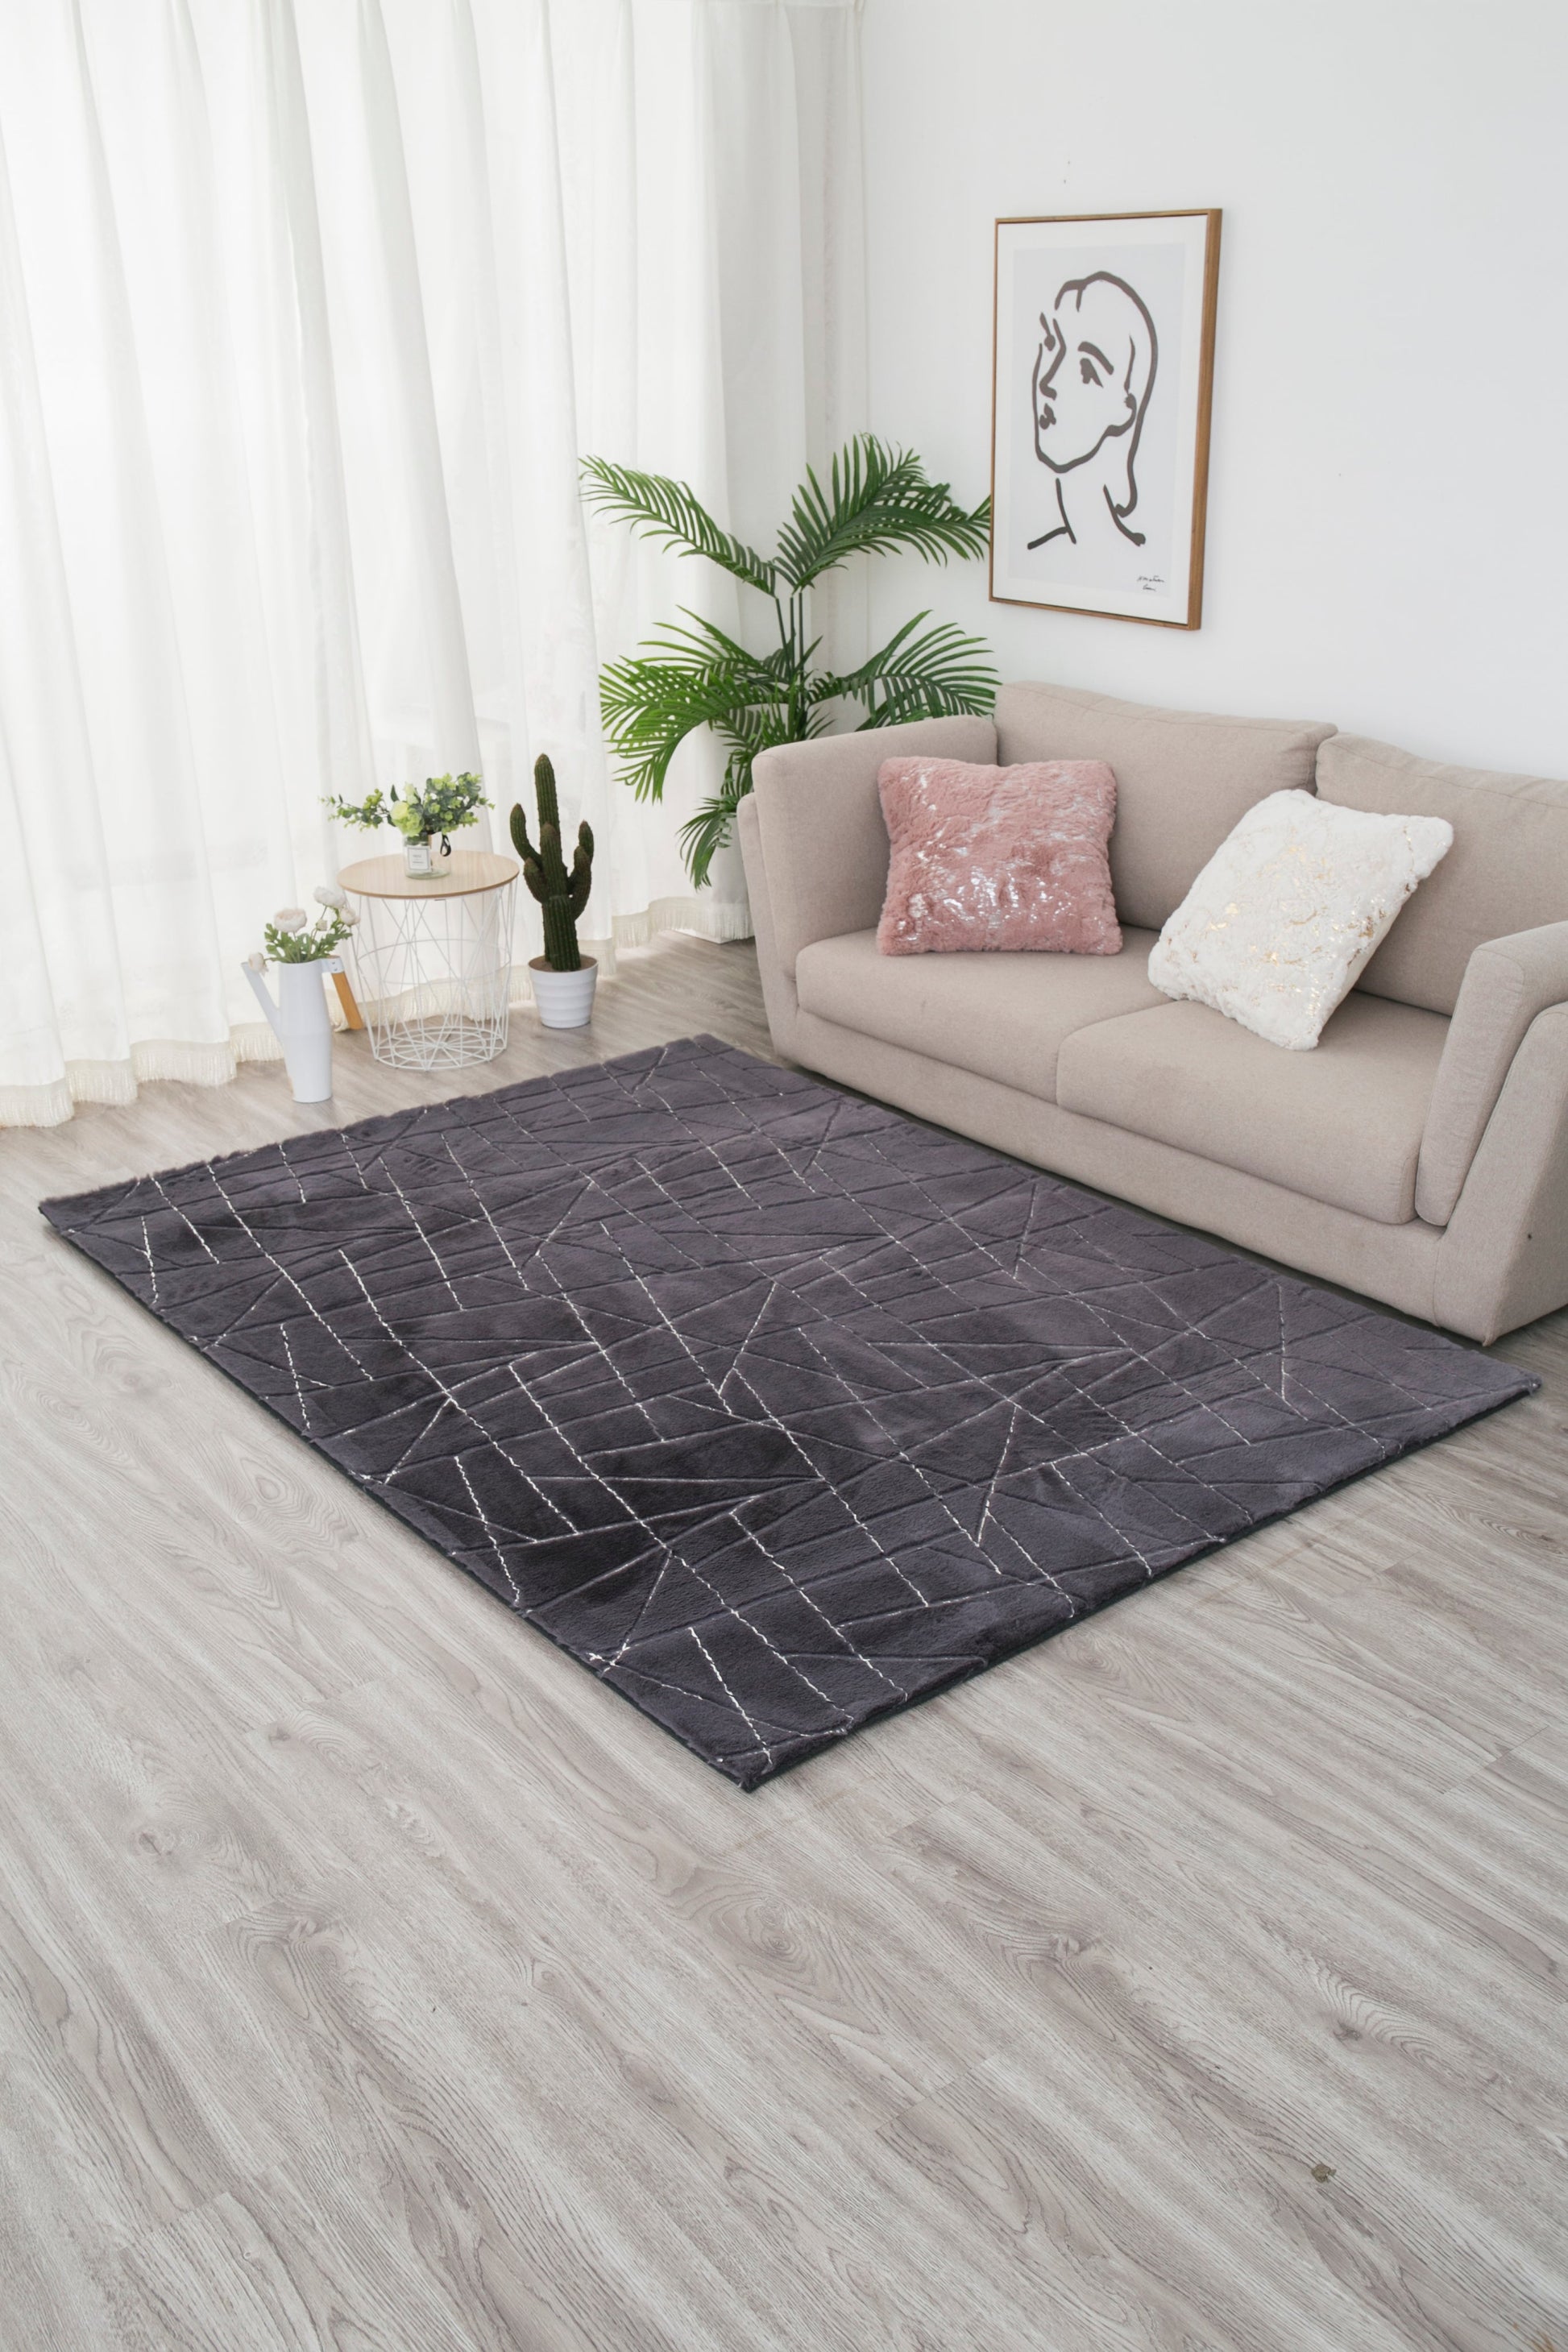 Charcoal Gray Faux Fur Rug With Metallic Silver Lines Rug/Carpet